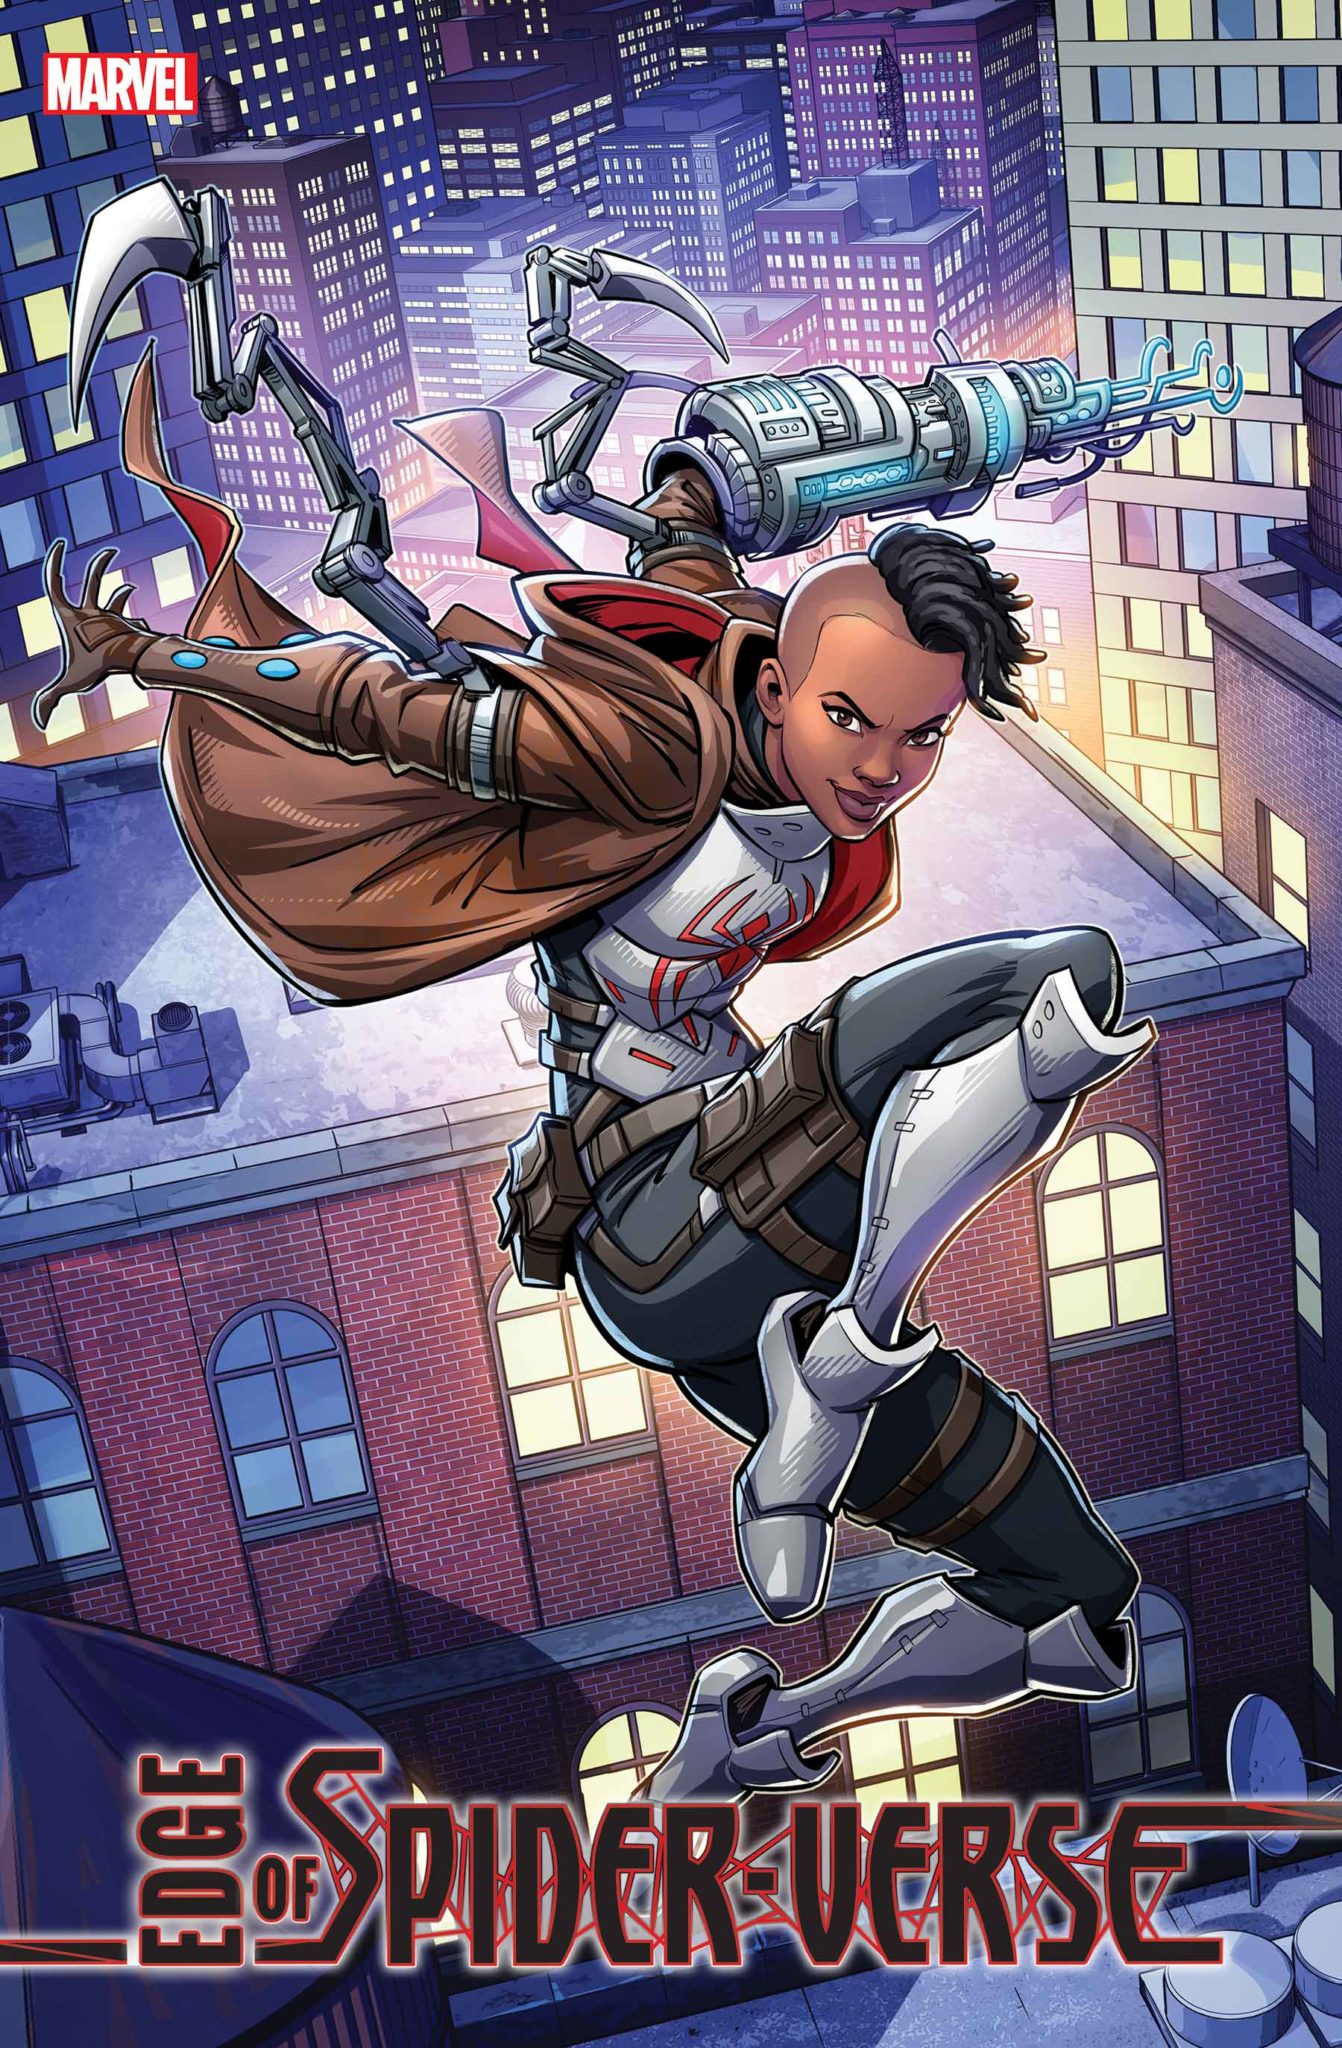 Edge of Spider-Verse #3 cover